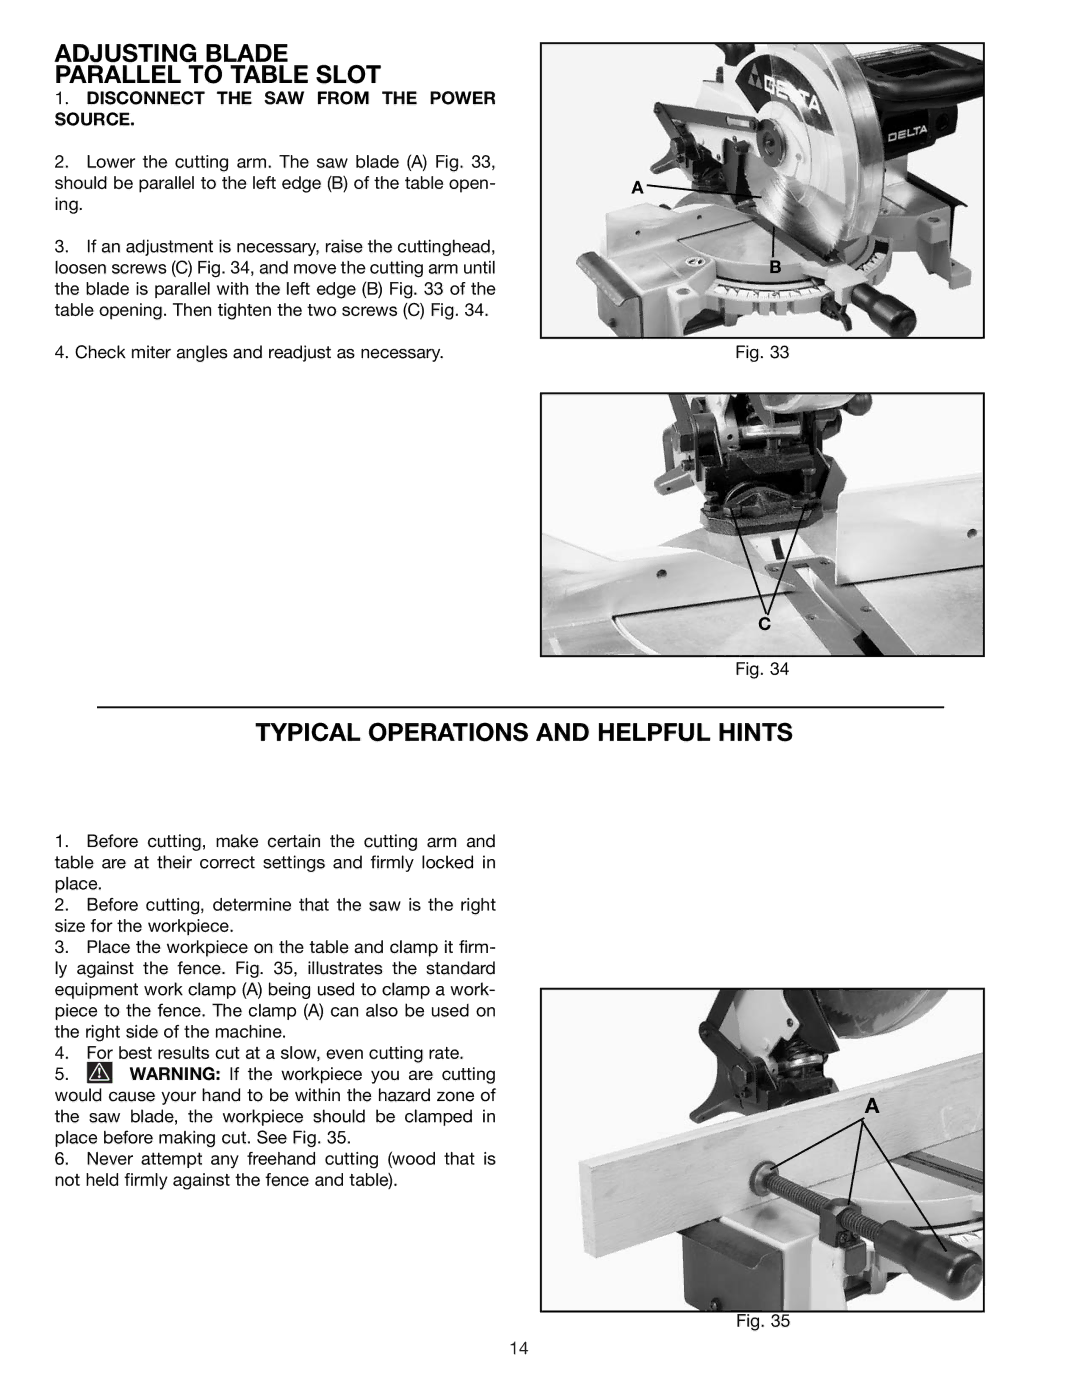 Porter-Cable 36-225 instruction manual Adjusting Blade Parallel to Table Slot, Typical Operations and Helpful Hints 